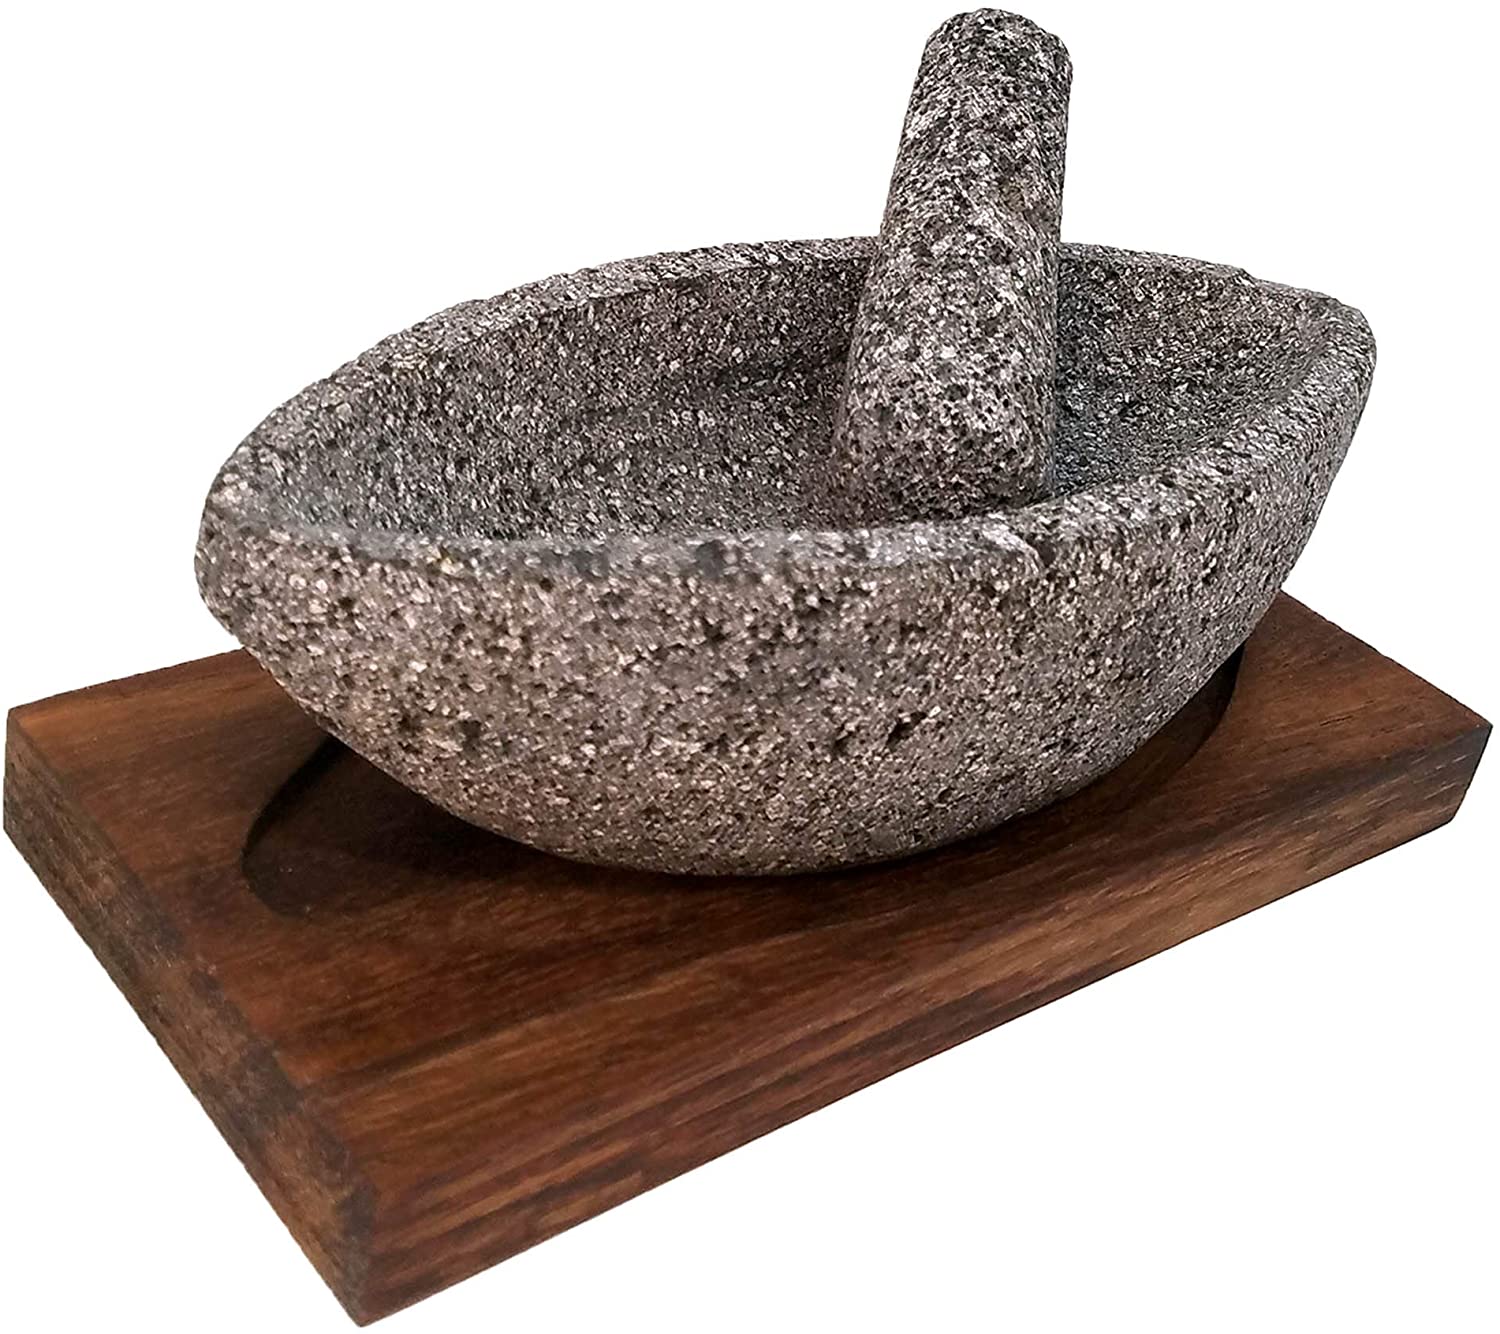 PRODUCTOS DE PIEDRA VOLCANICA / Canoe Shaped Mortar and Pestle Set with Parota Wood Serving Board / Enhance your table setting with this original canoe-shaped mortar and pestle set with included wood serving board, as it is eye-catching, yet functional.